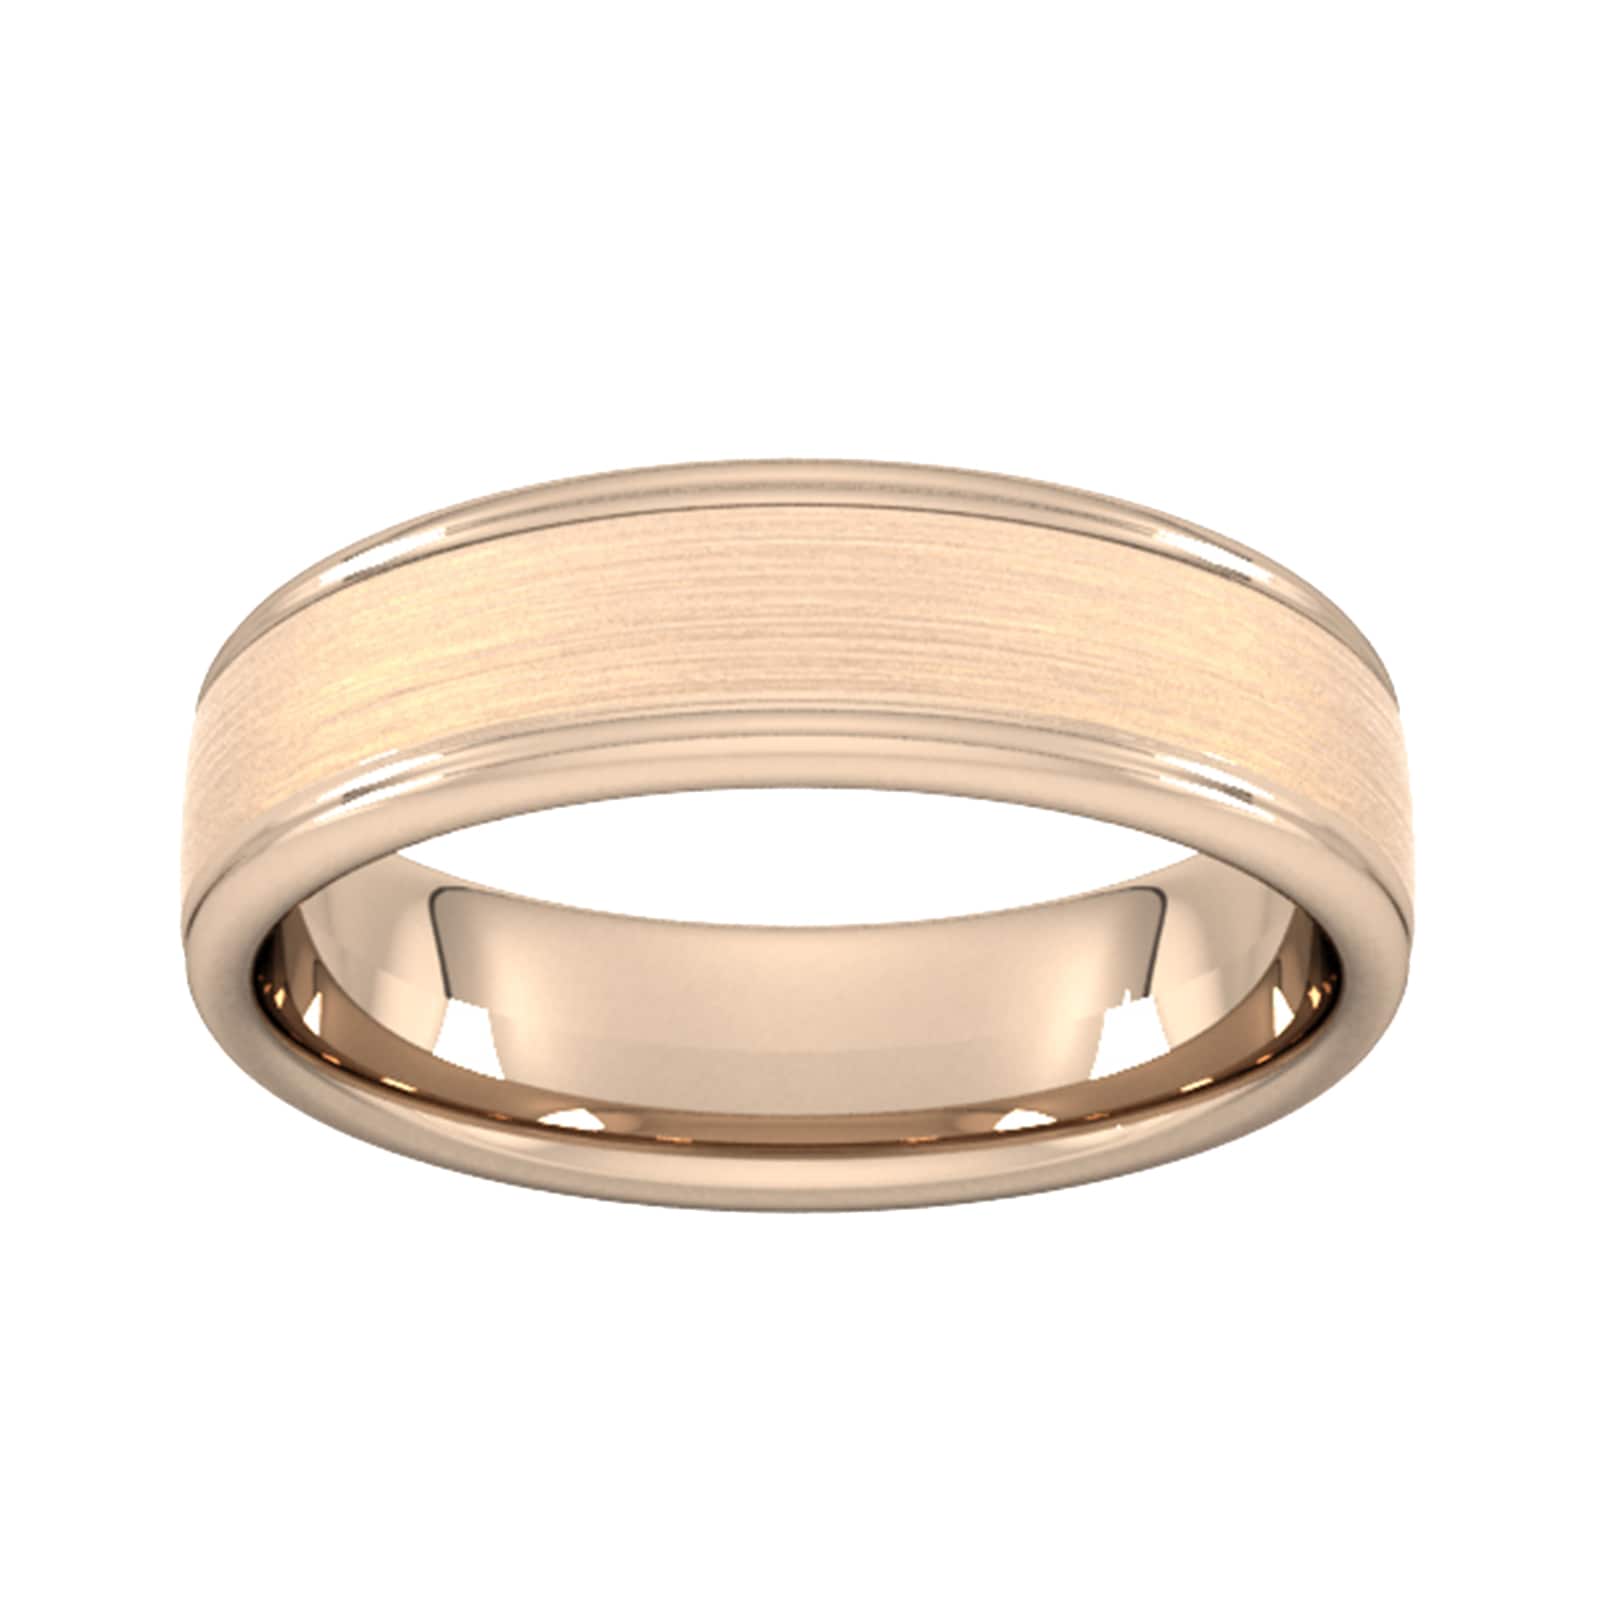 6mm D Shape Heavy Matt Centre With Grooves Wedding Ring In 9 Carat Rose Gold - Ring Size K